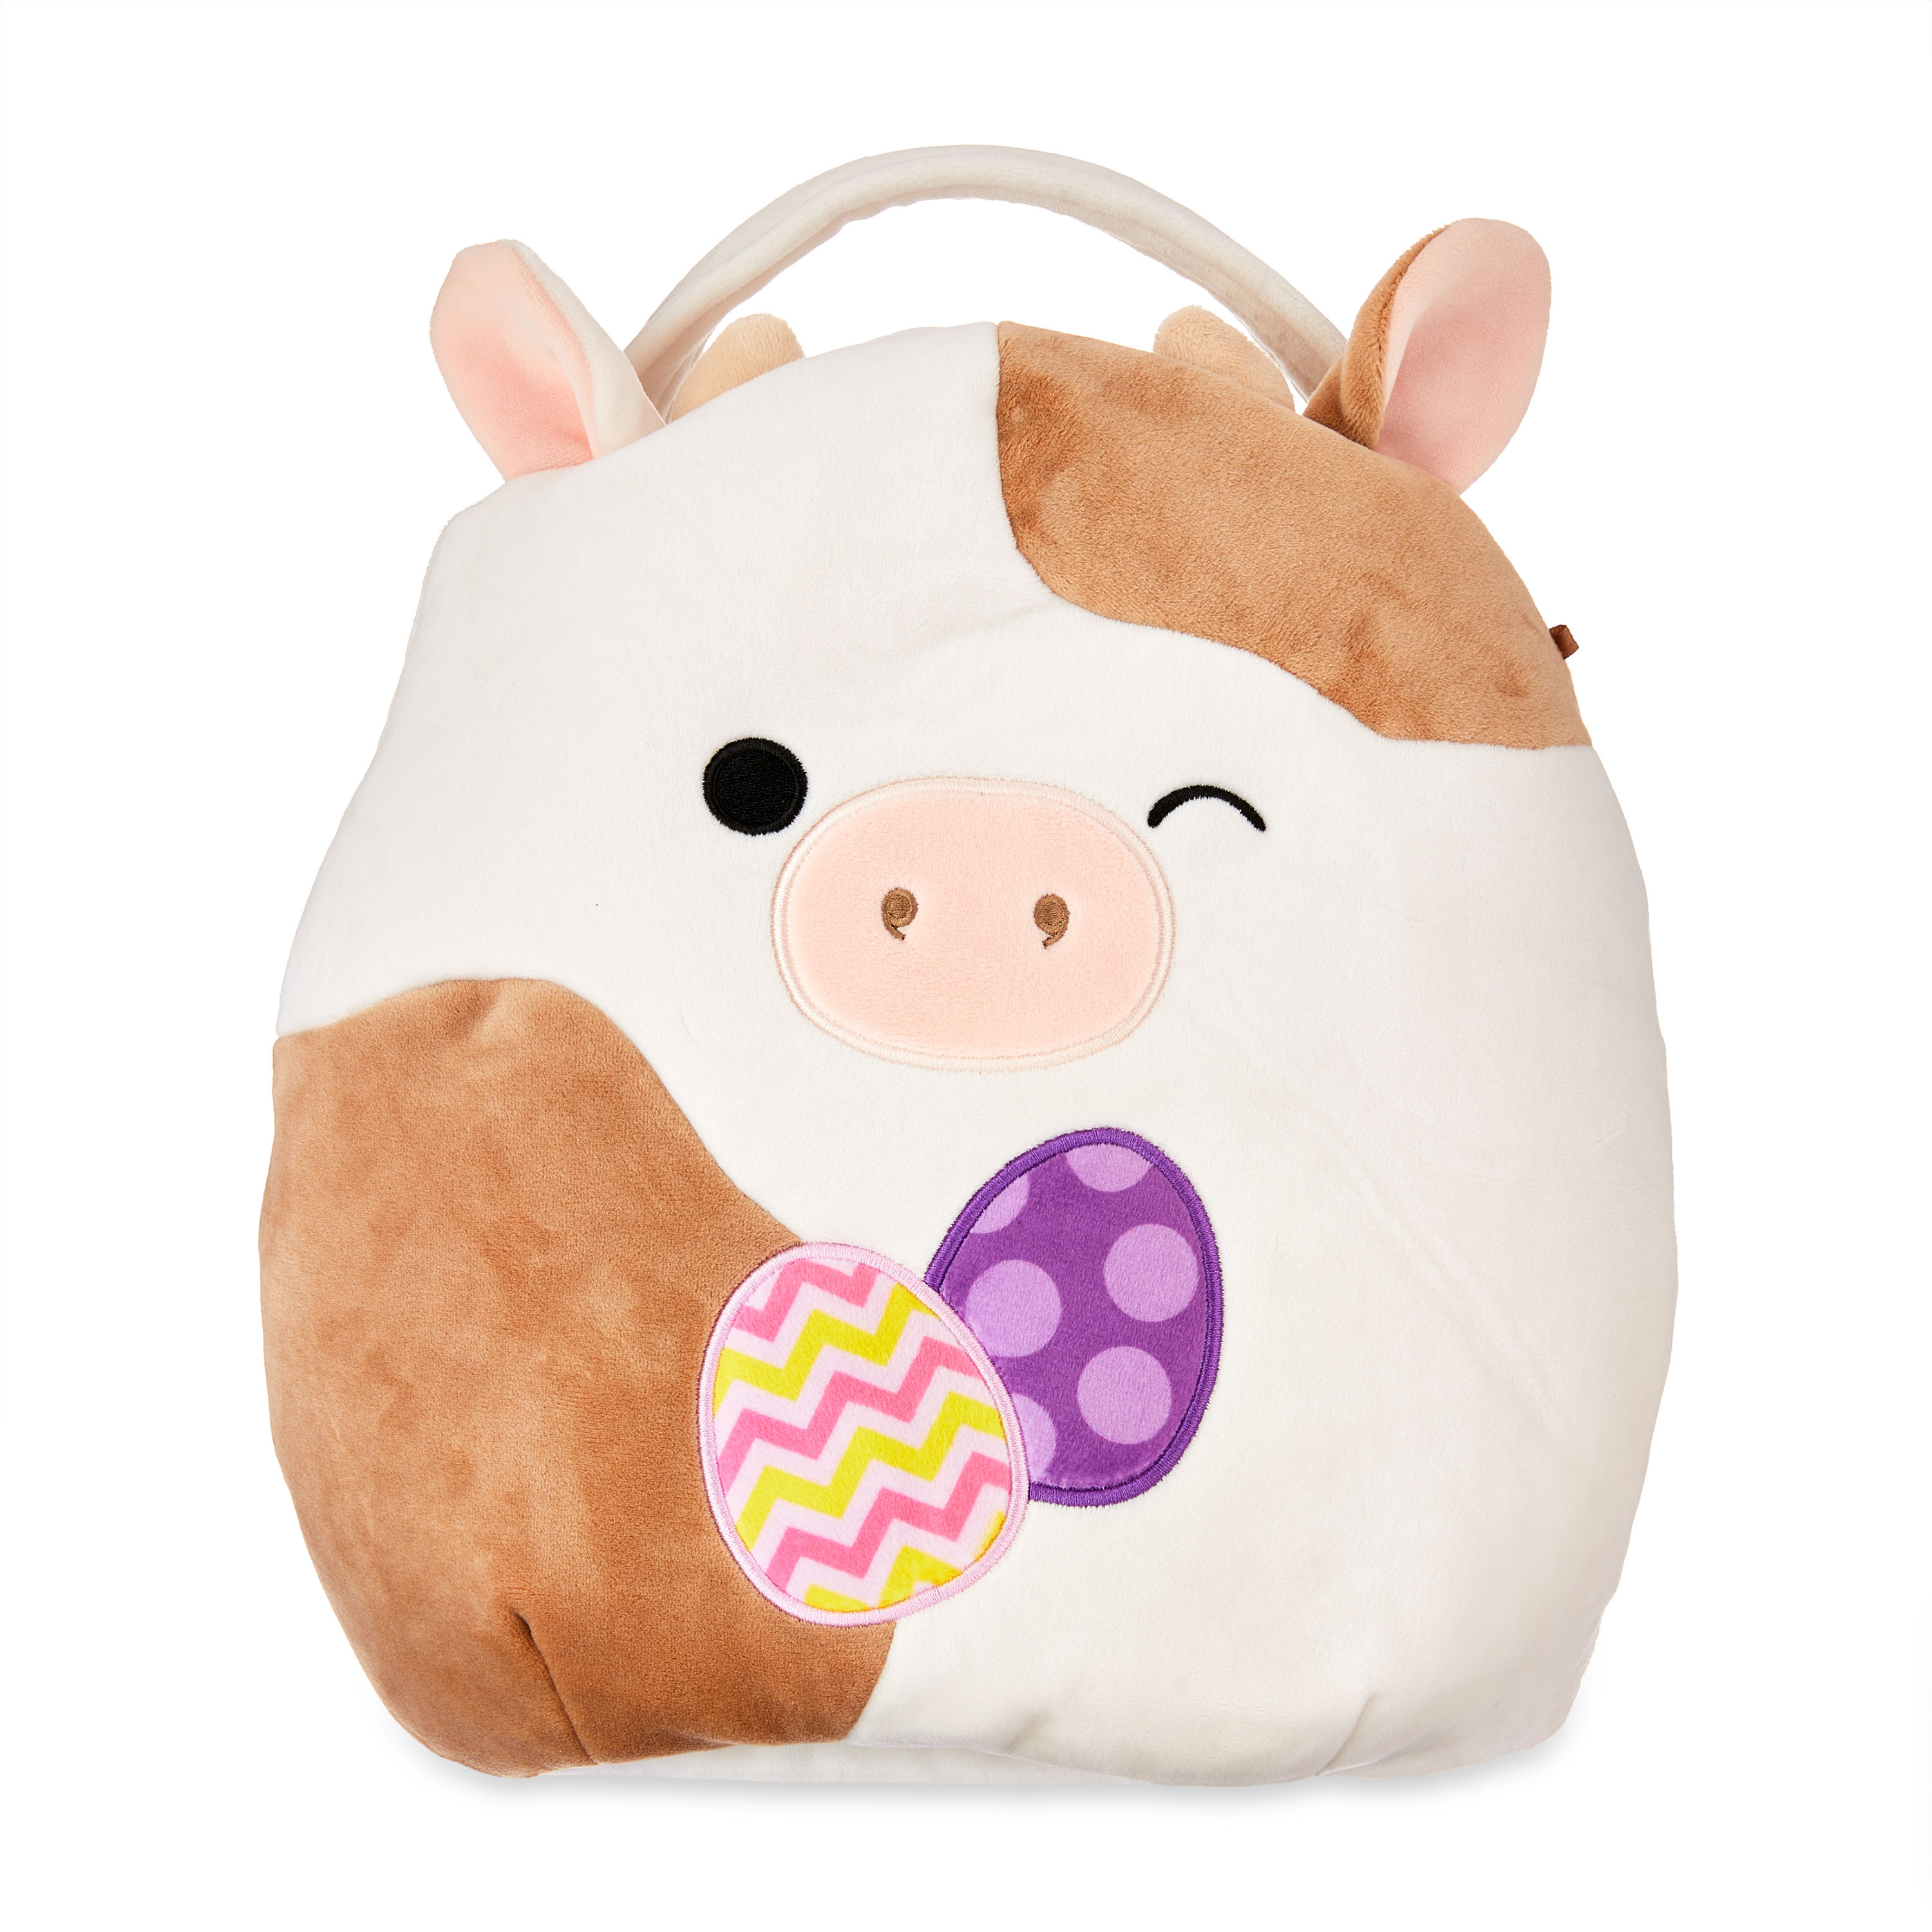 Squishmallows 12" Cow Treat Pail - Ronnie, The Stuffed Animal Plush - image 1 of 5